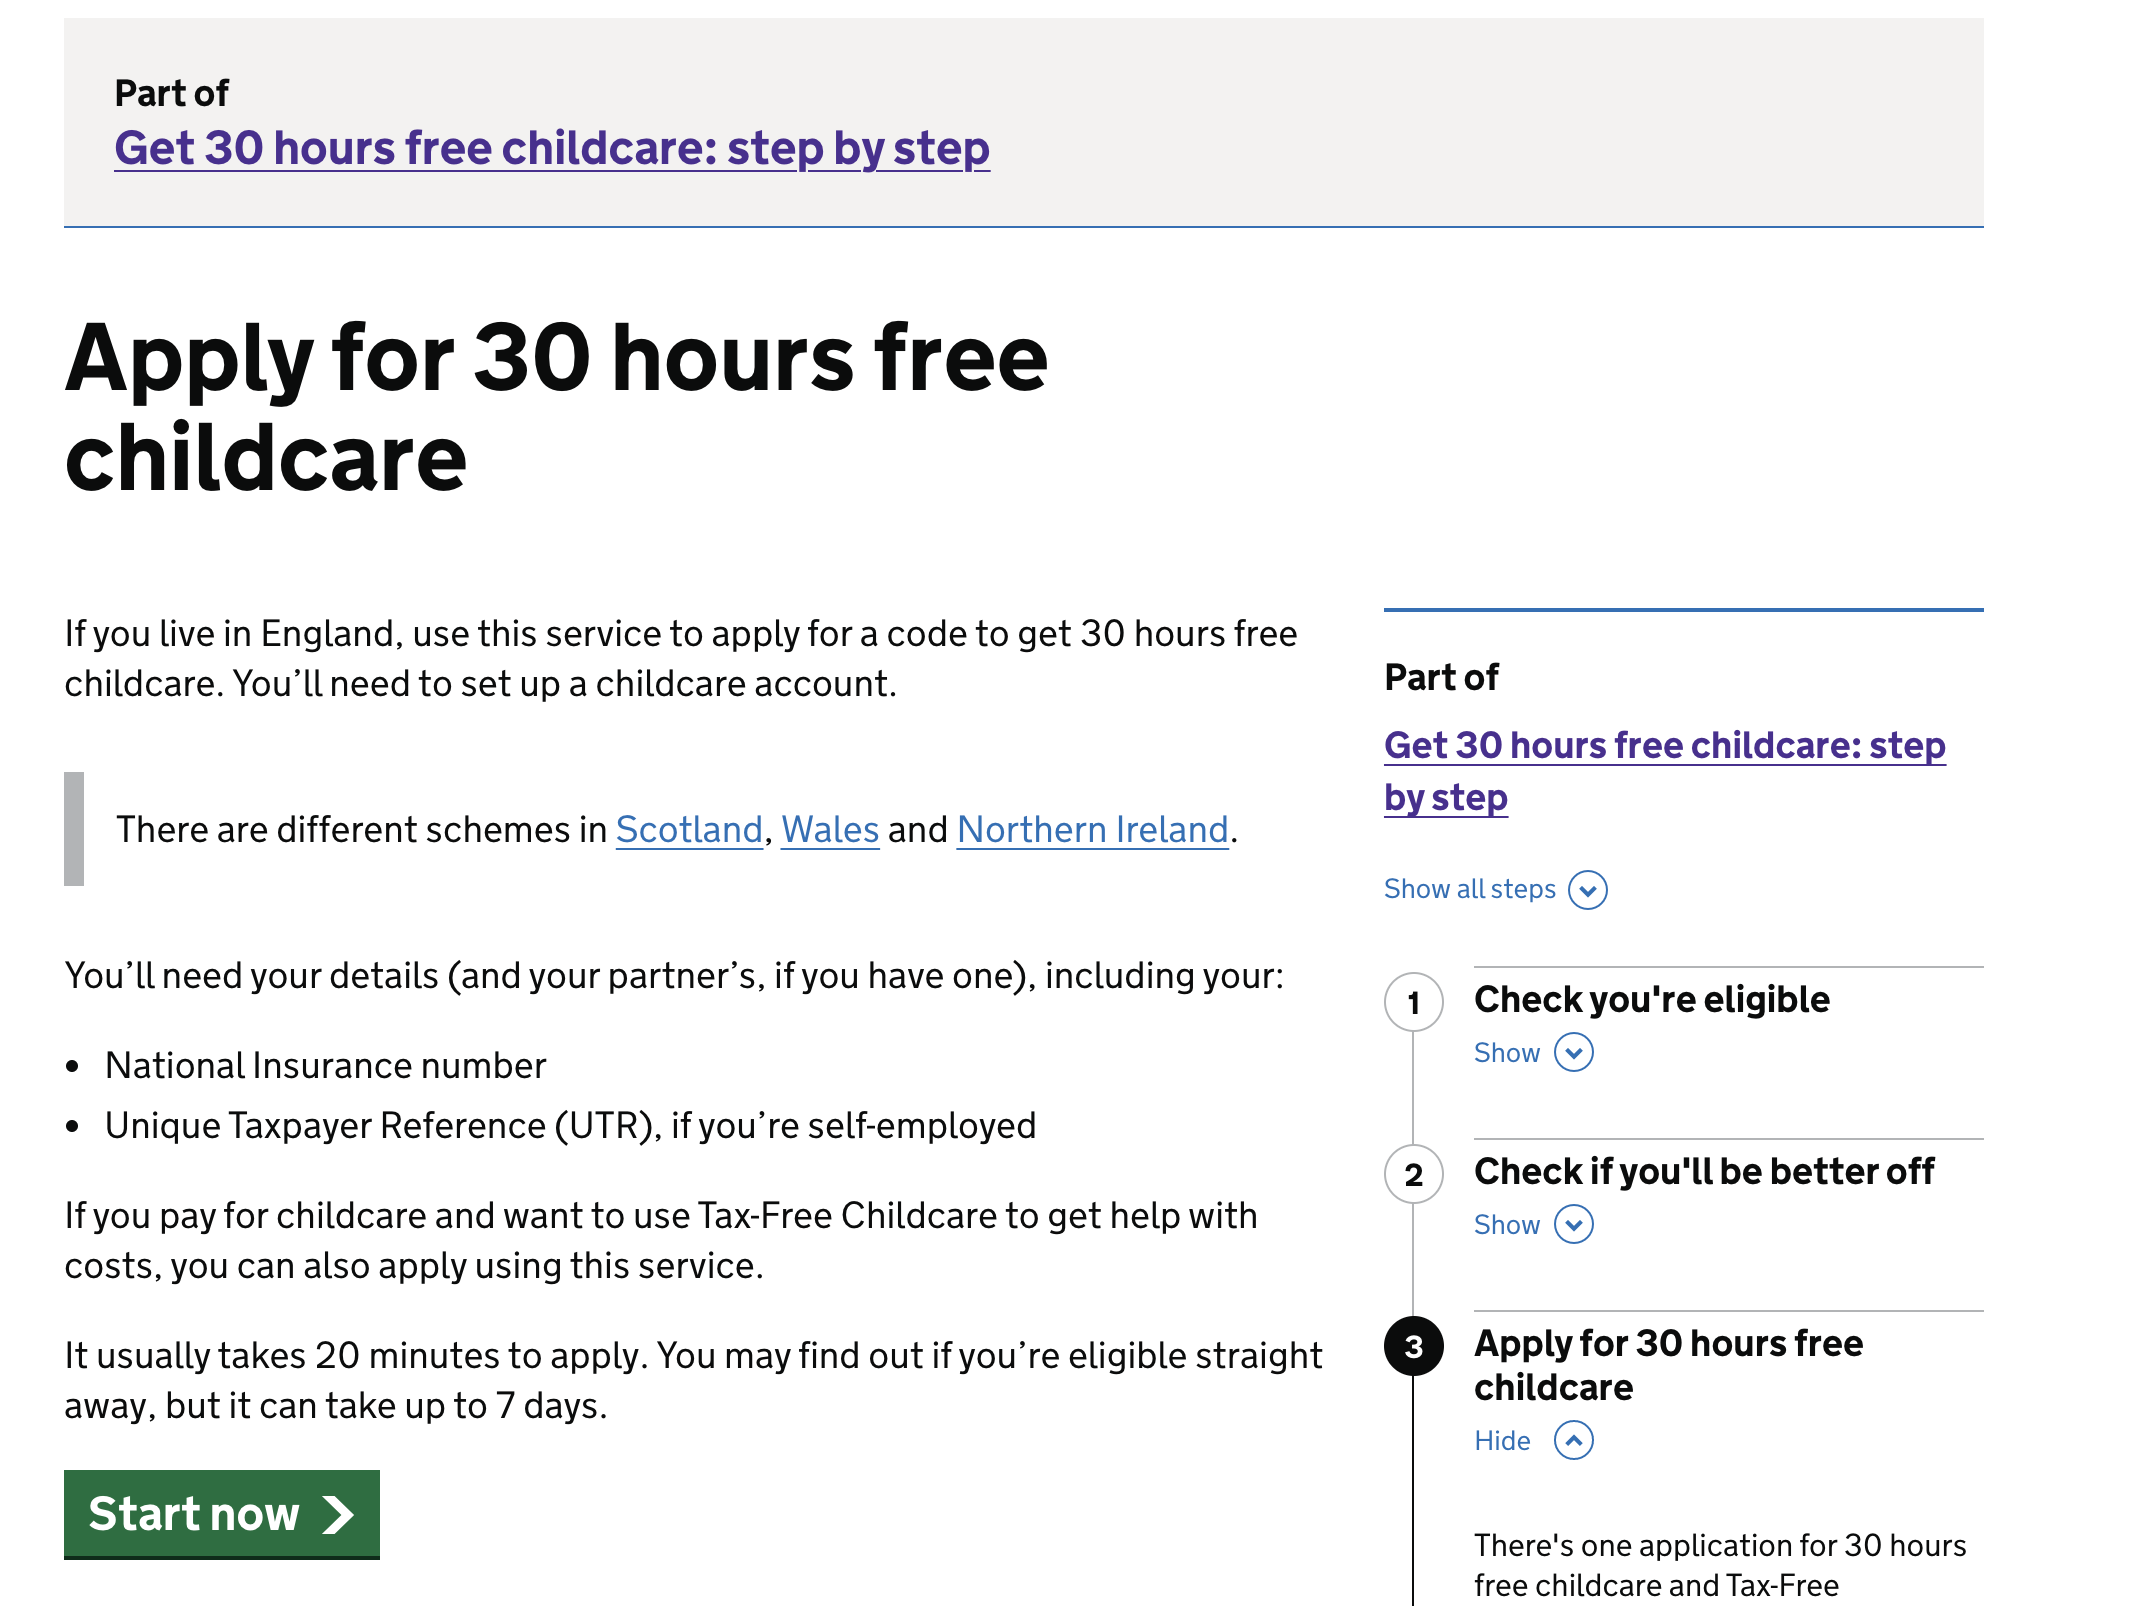 This website is where parents can apply for entitlement. Screengrab took from the official government website. Access the website via: https://www.gov.uk/apply-30-hours-free-childcare